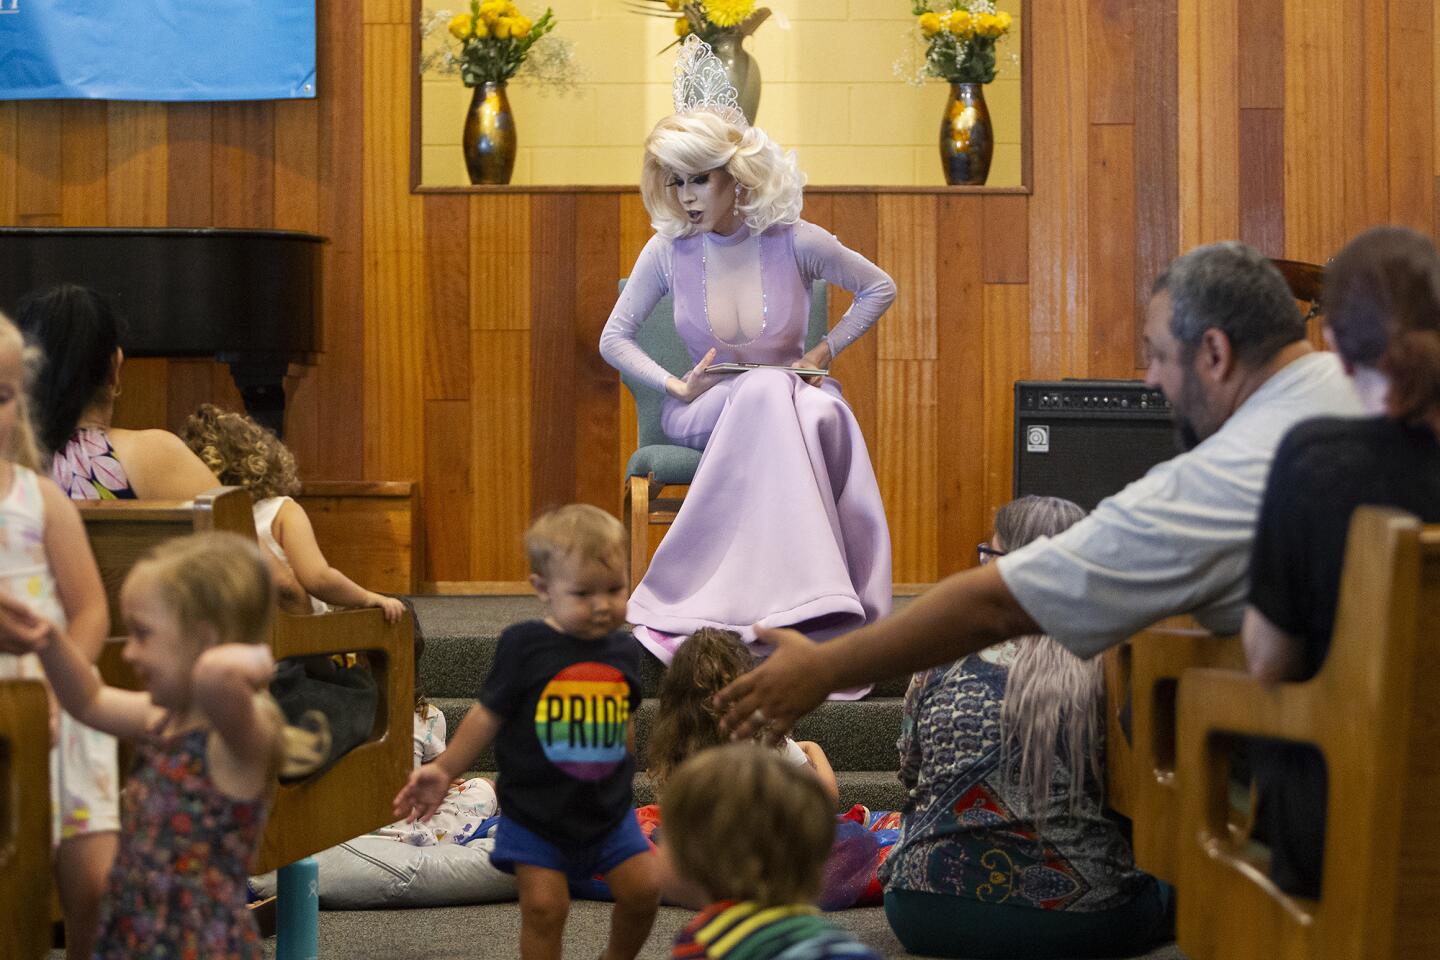 Photo Gallery: Drag queen Autumn Rose reads to children at Fairview Community Church